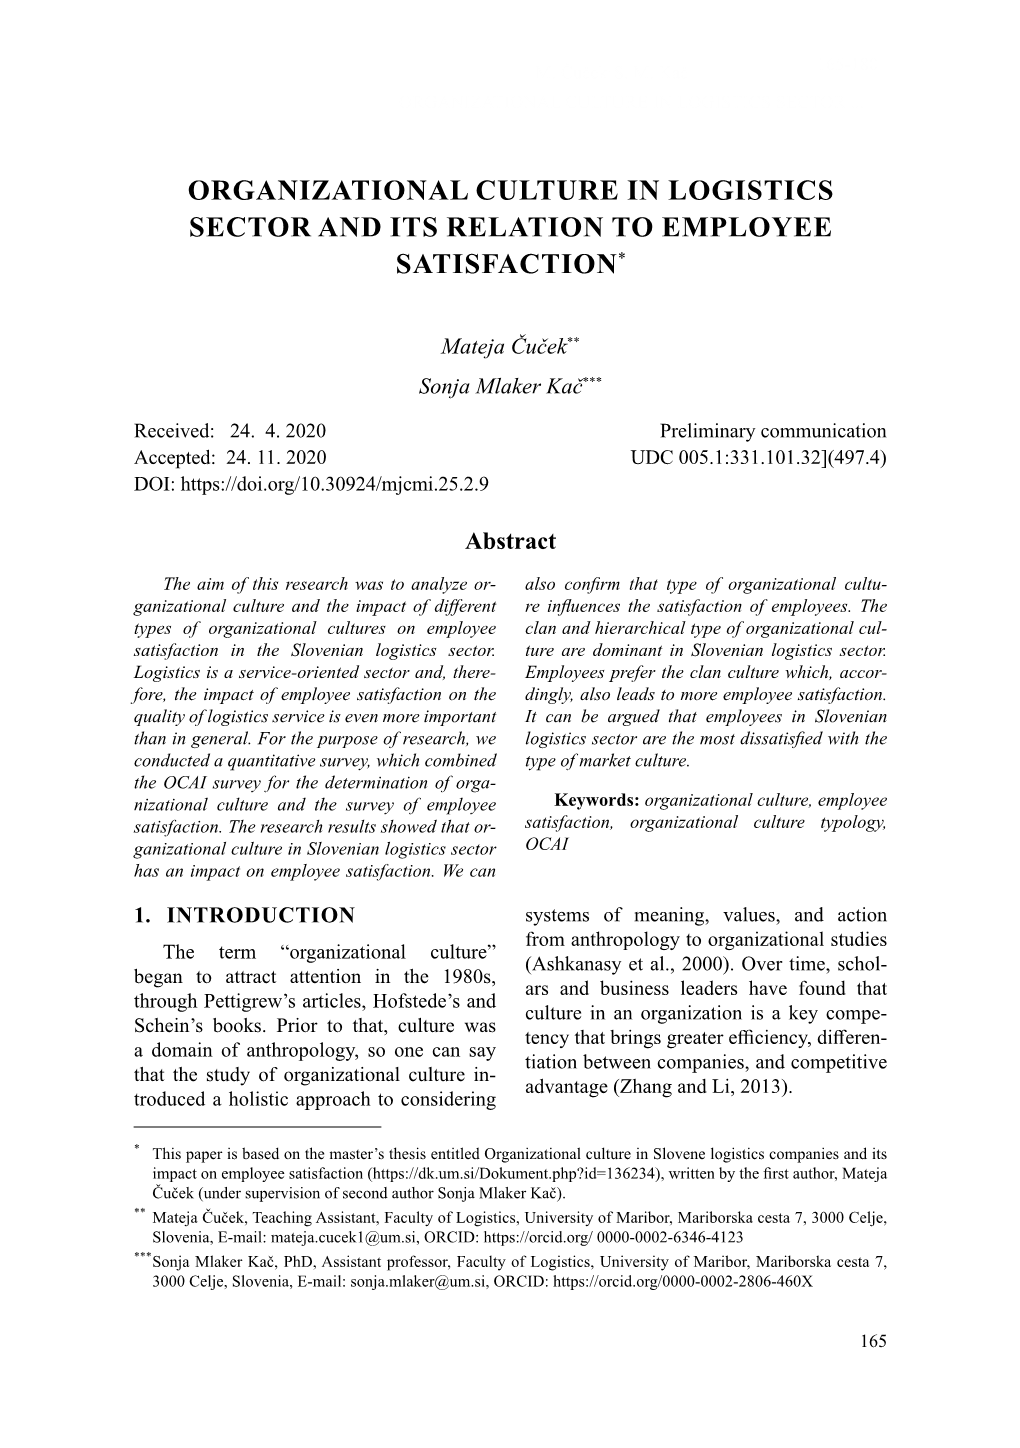 Organizational Culture in Logistics Sector and Its Relation to Employee Satisfaction*